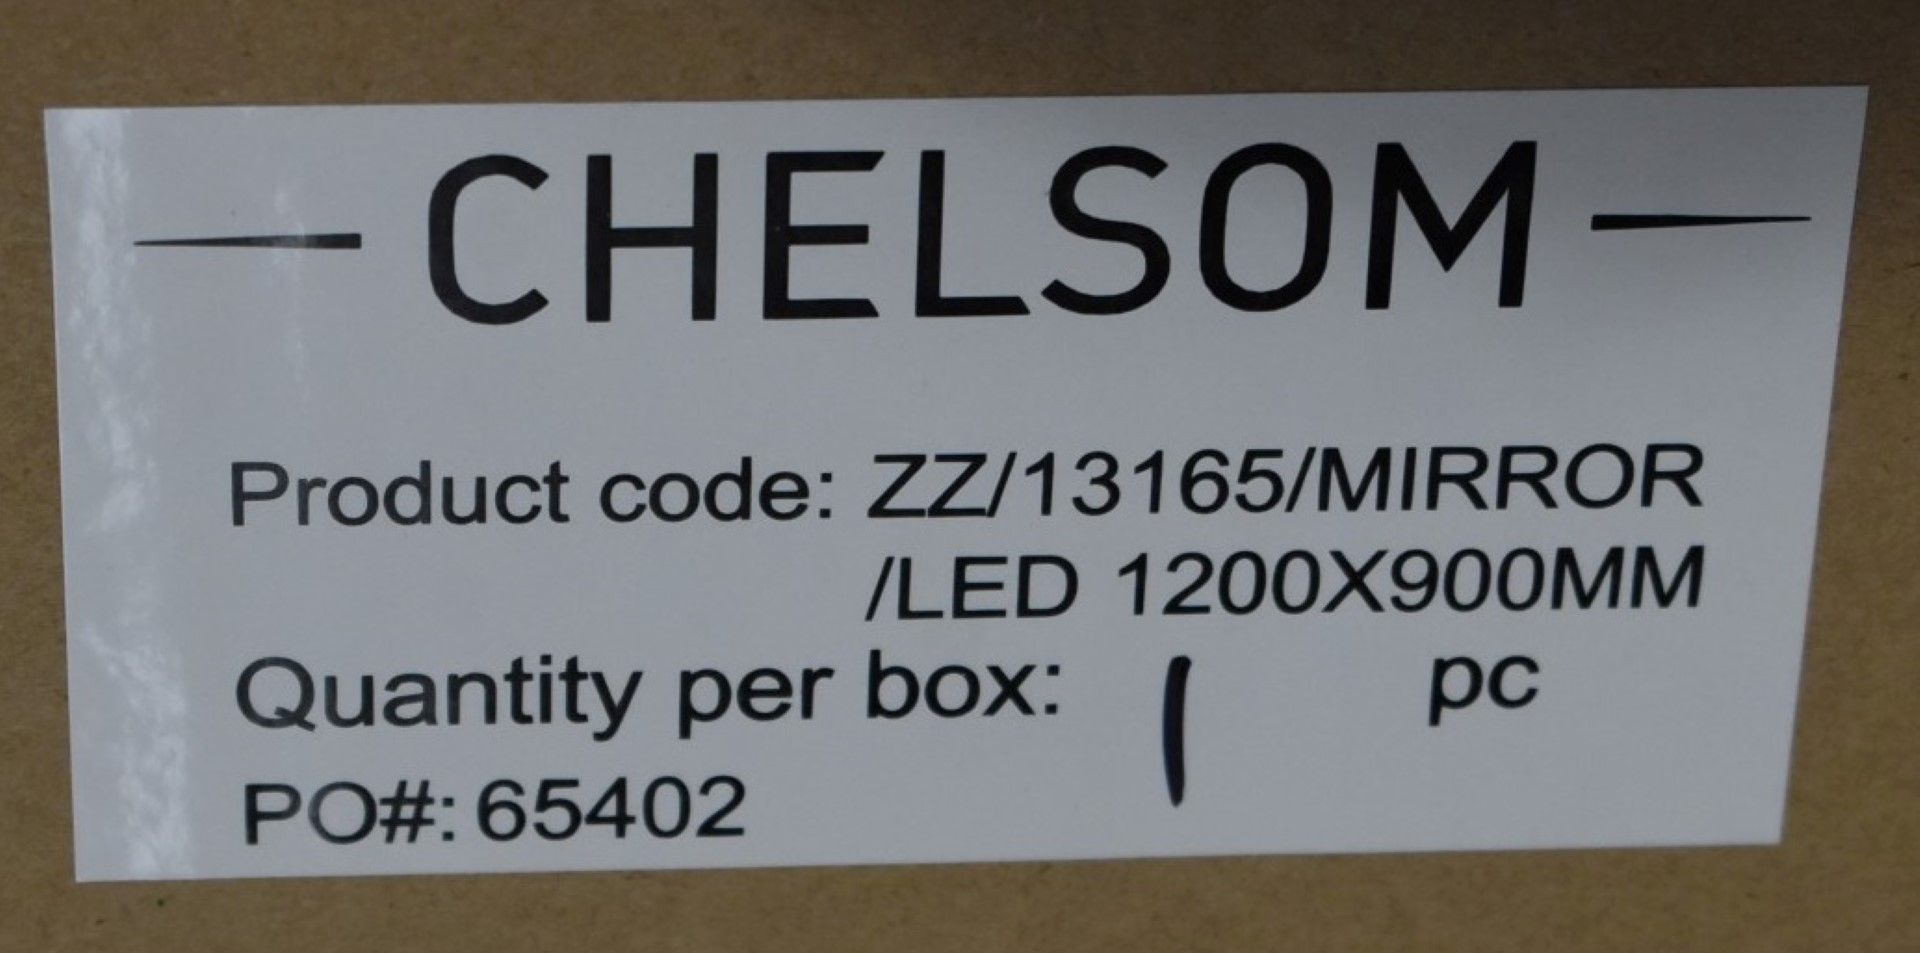 1 x Chelsom Large Illuminated LED Bathroom Mirror With Demister - Brand New Stock - As Used in Major - Image 2 of 13